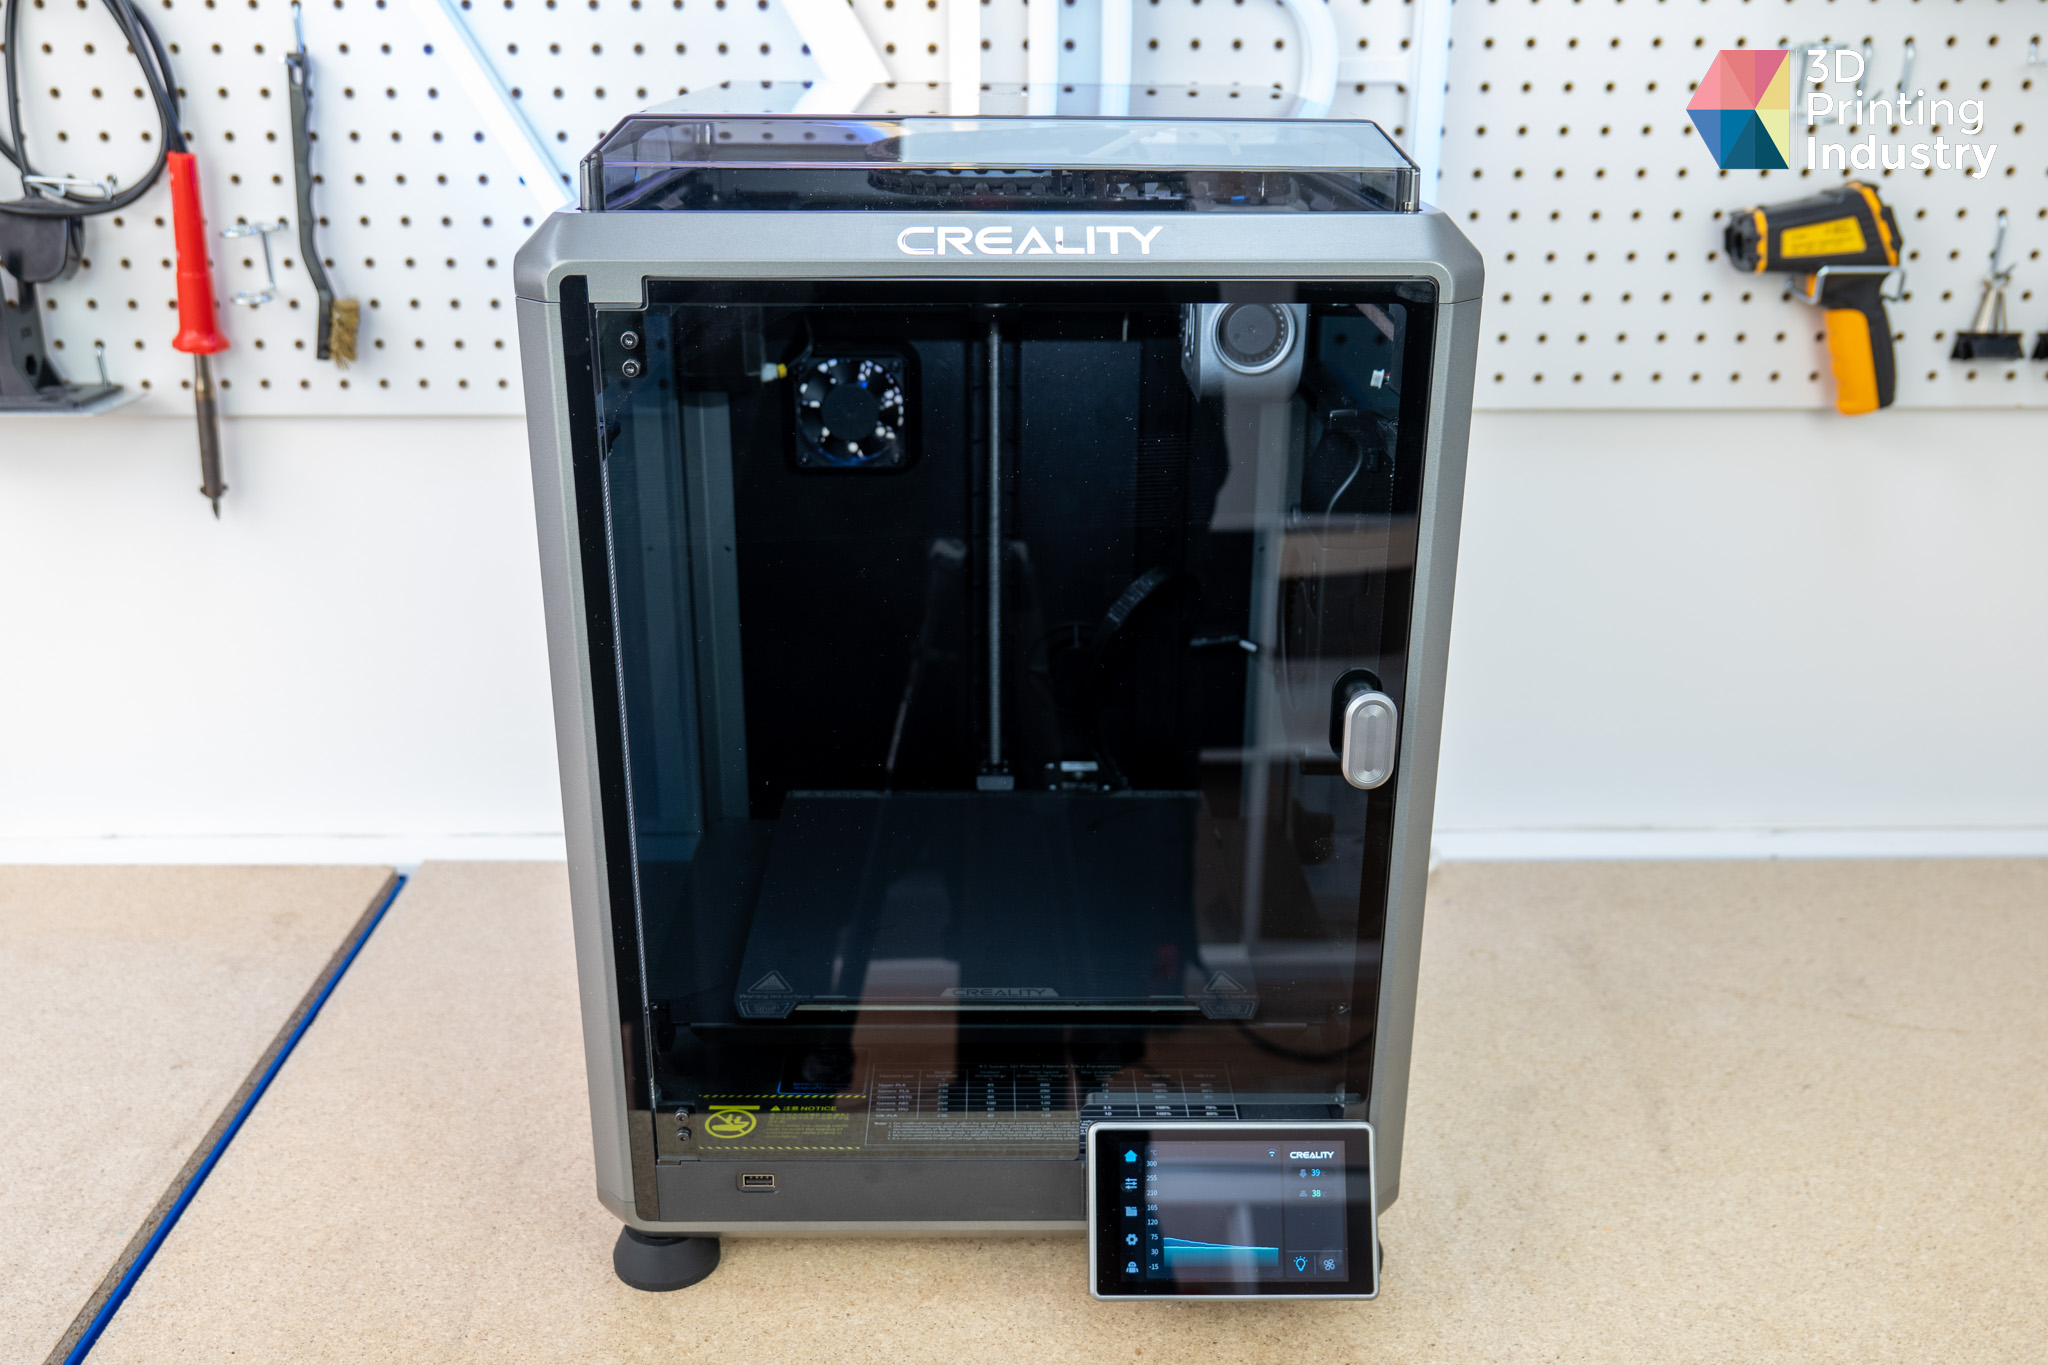 Review: Creality K1 - high-speed, high-quality 3D printing for